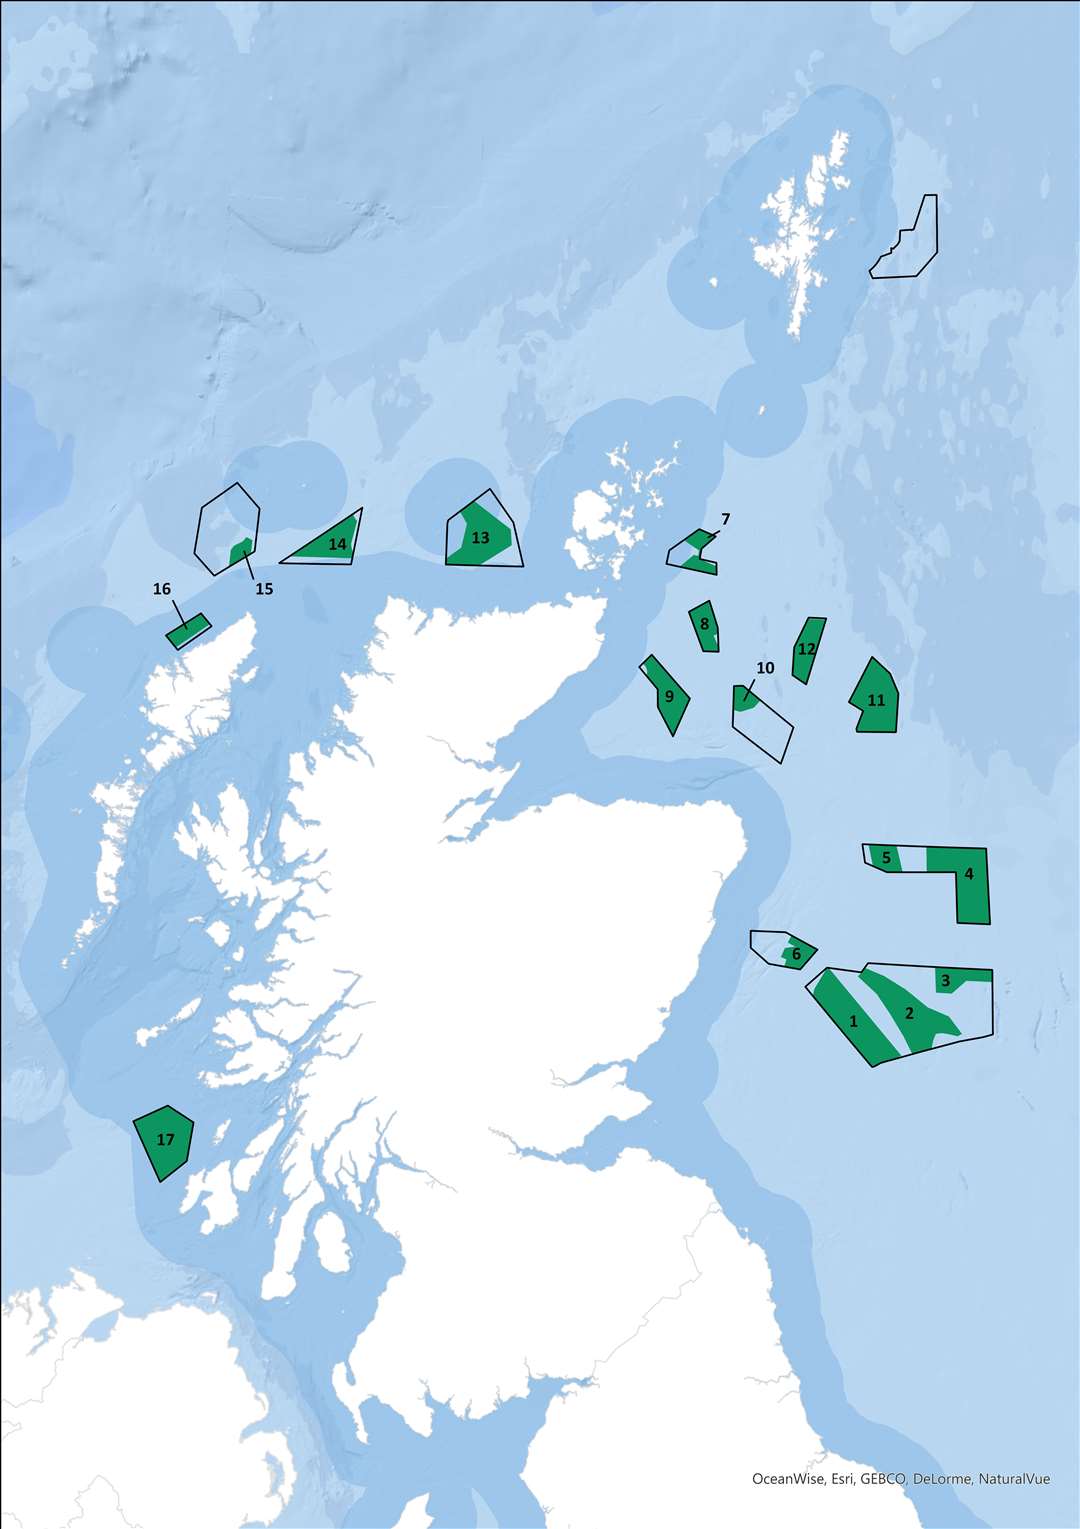 The locations of the offshore wind farm projects which have been awarded leases.